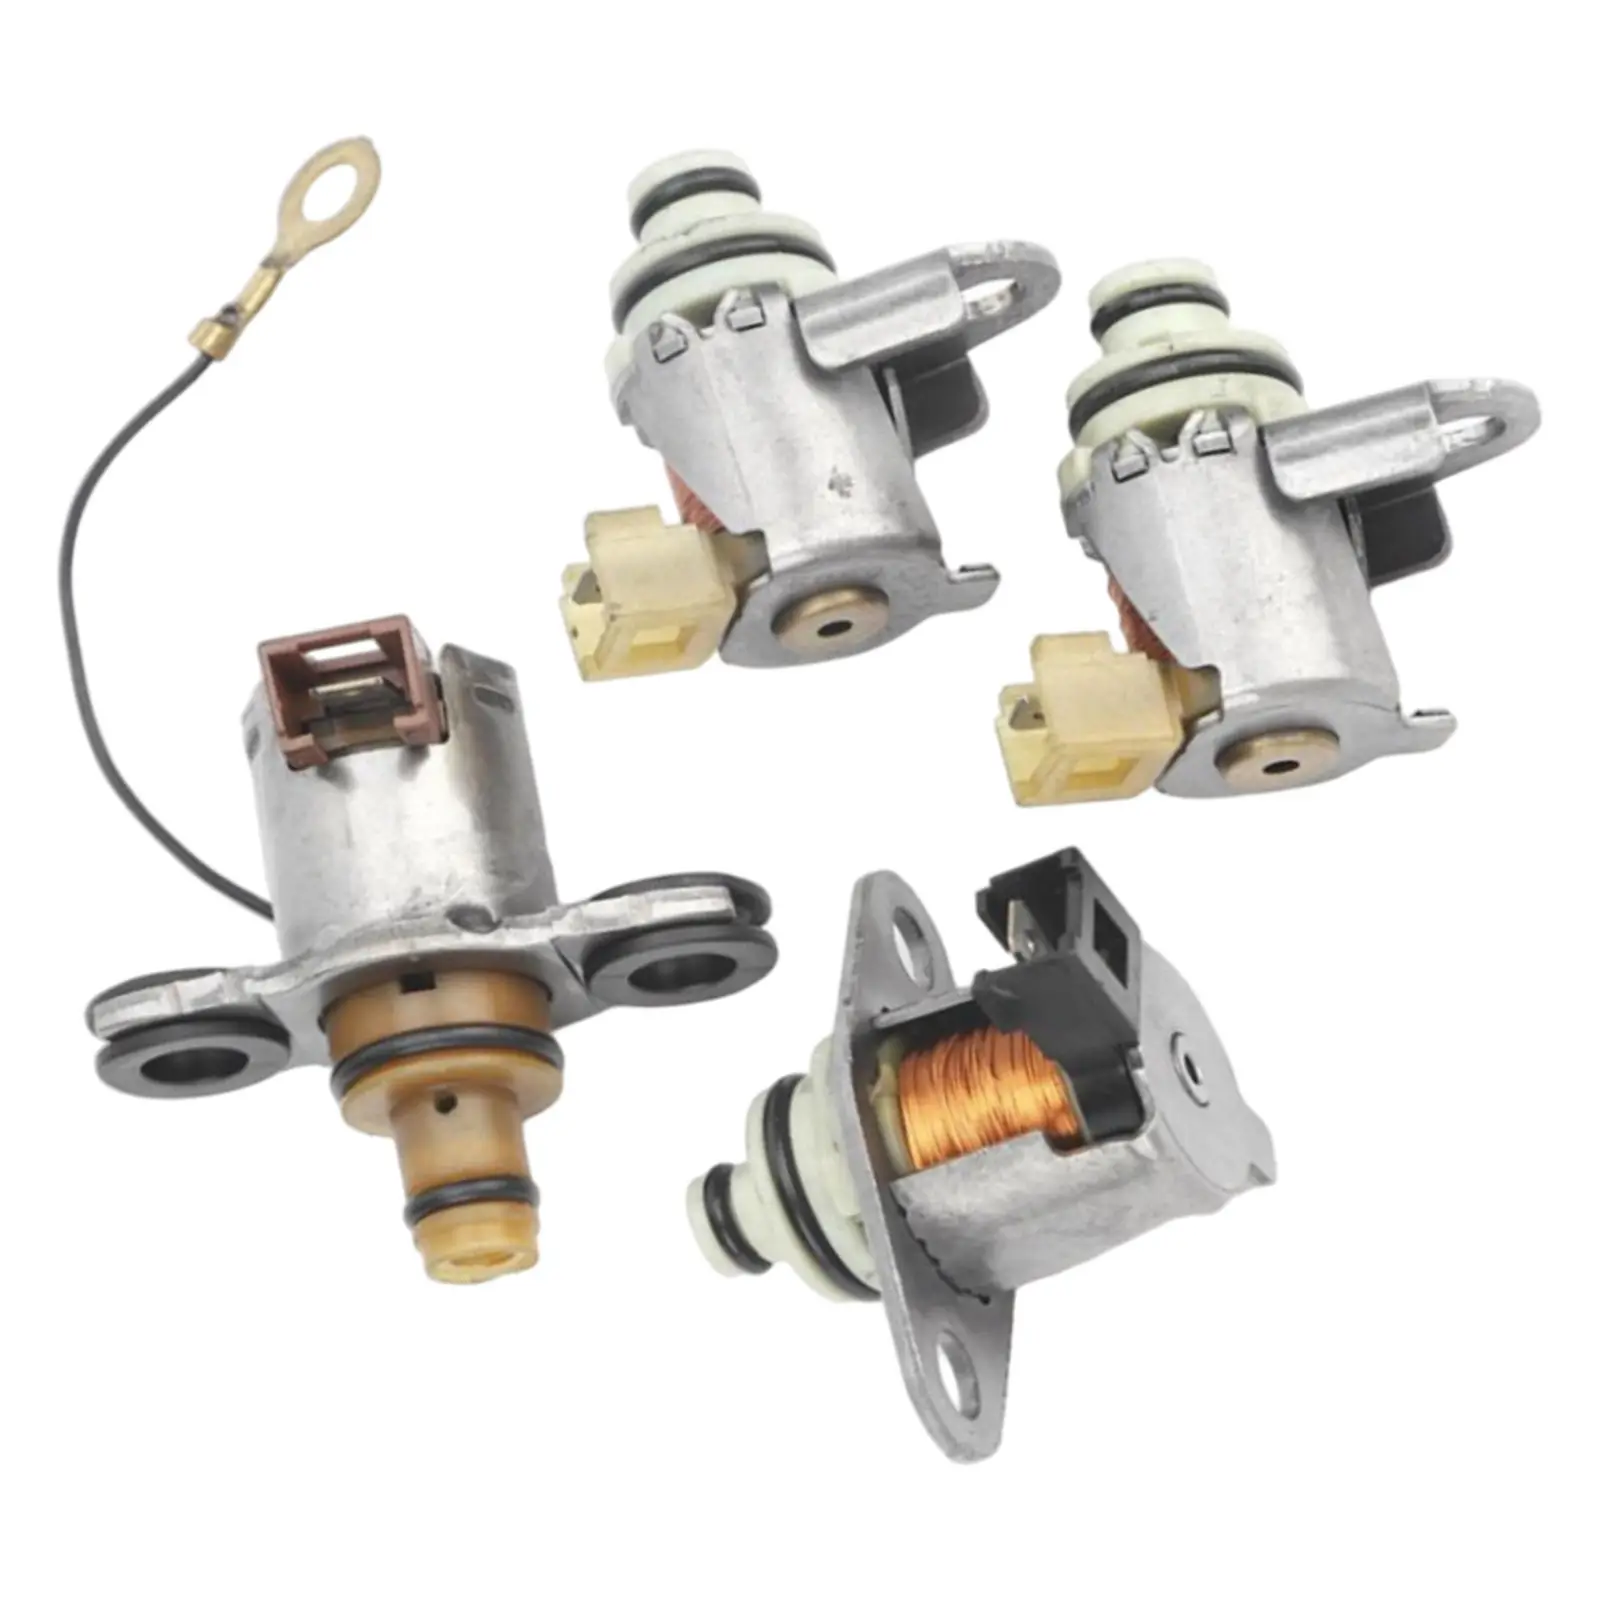 

4x JF402E JF405E G6T46571 45663-02700 Transmiion Solenoids, Replacement Acceories Supplies for Chevolet Series